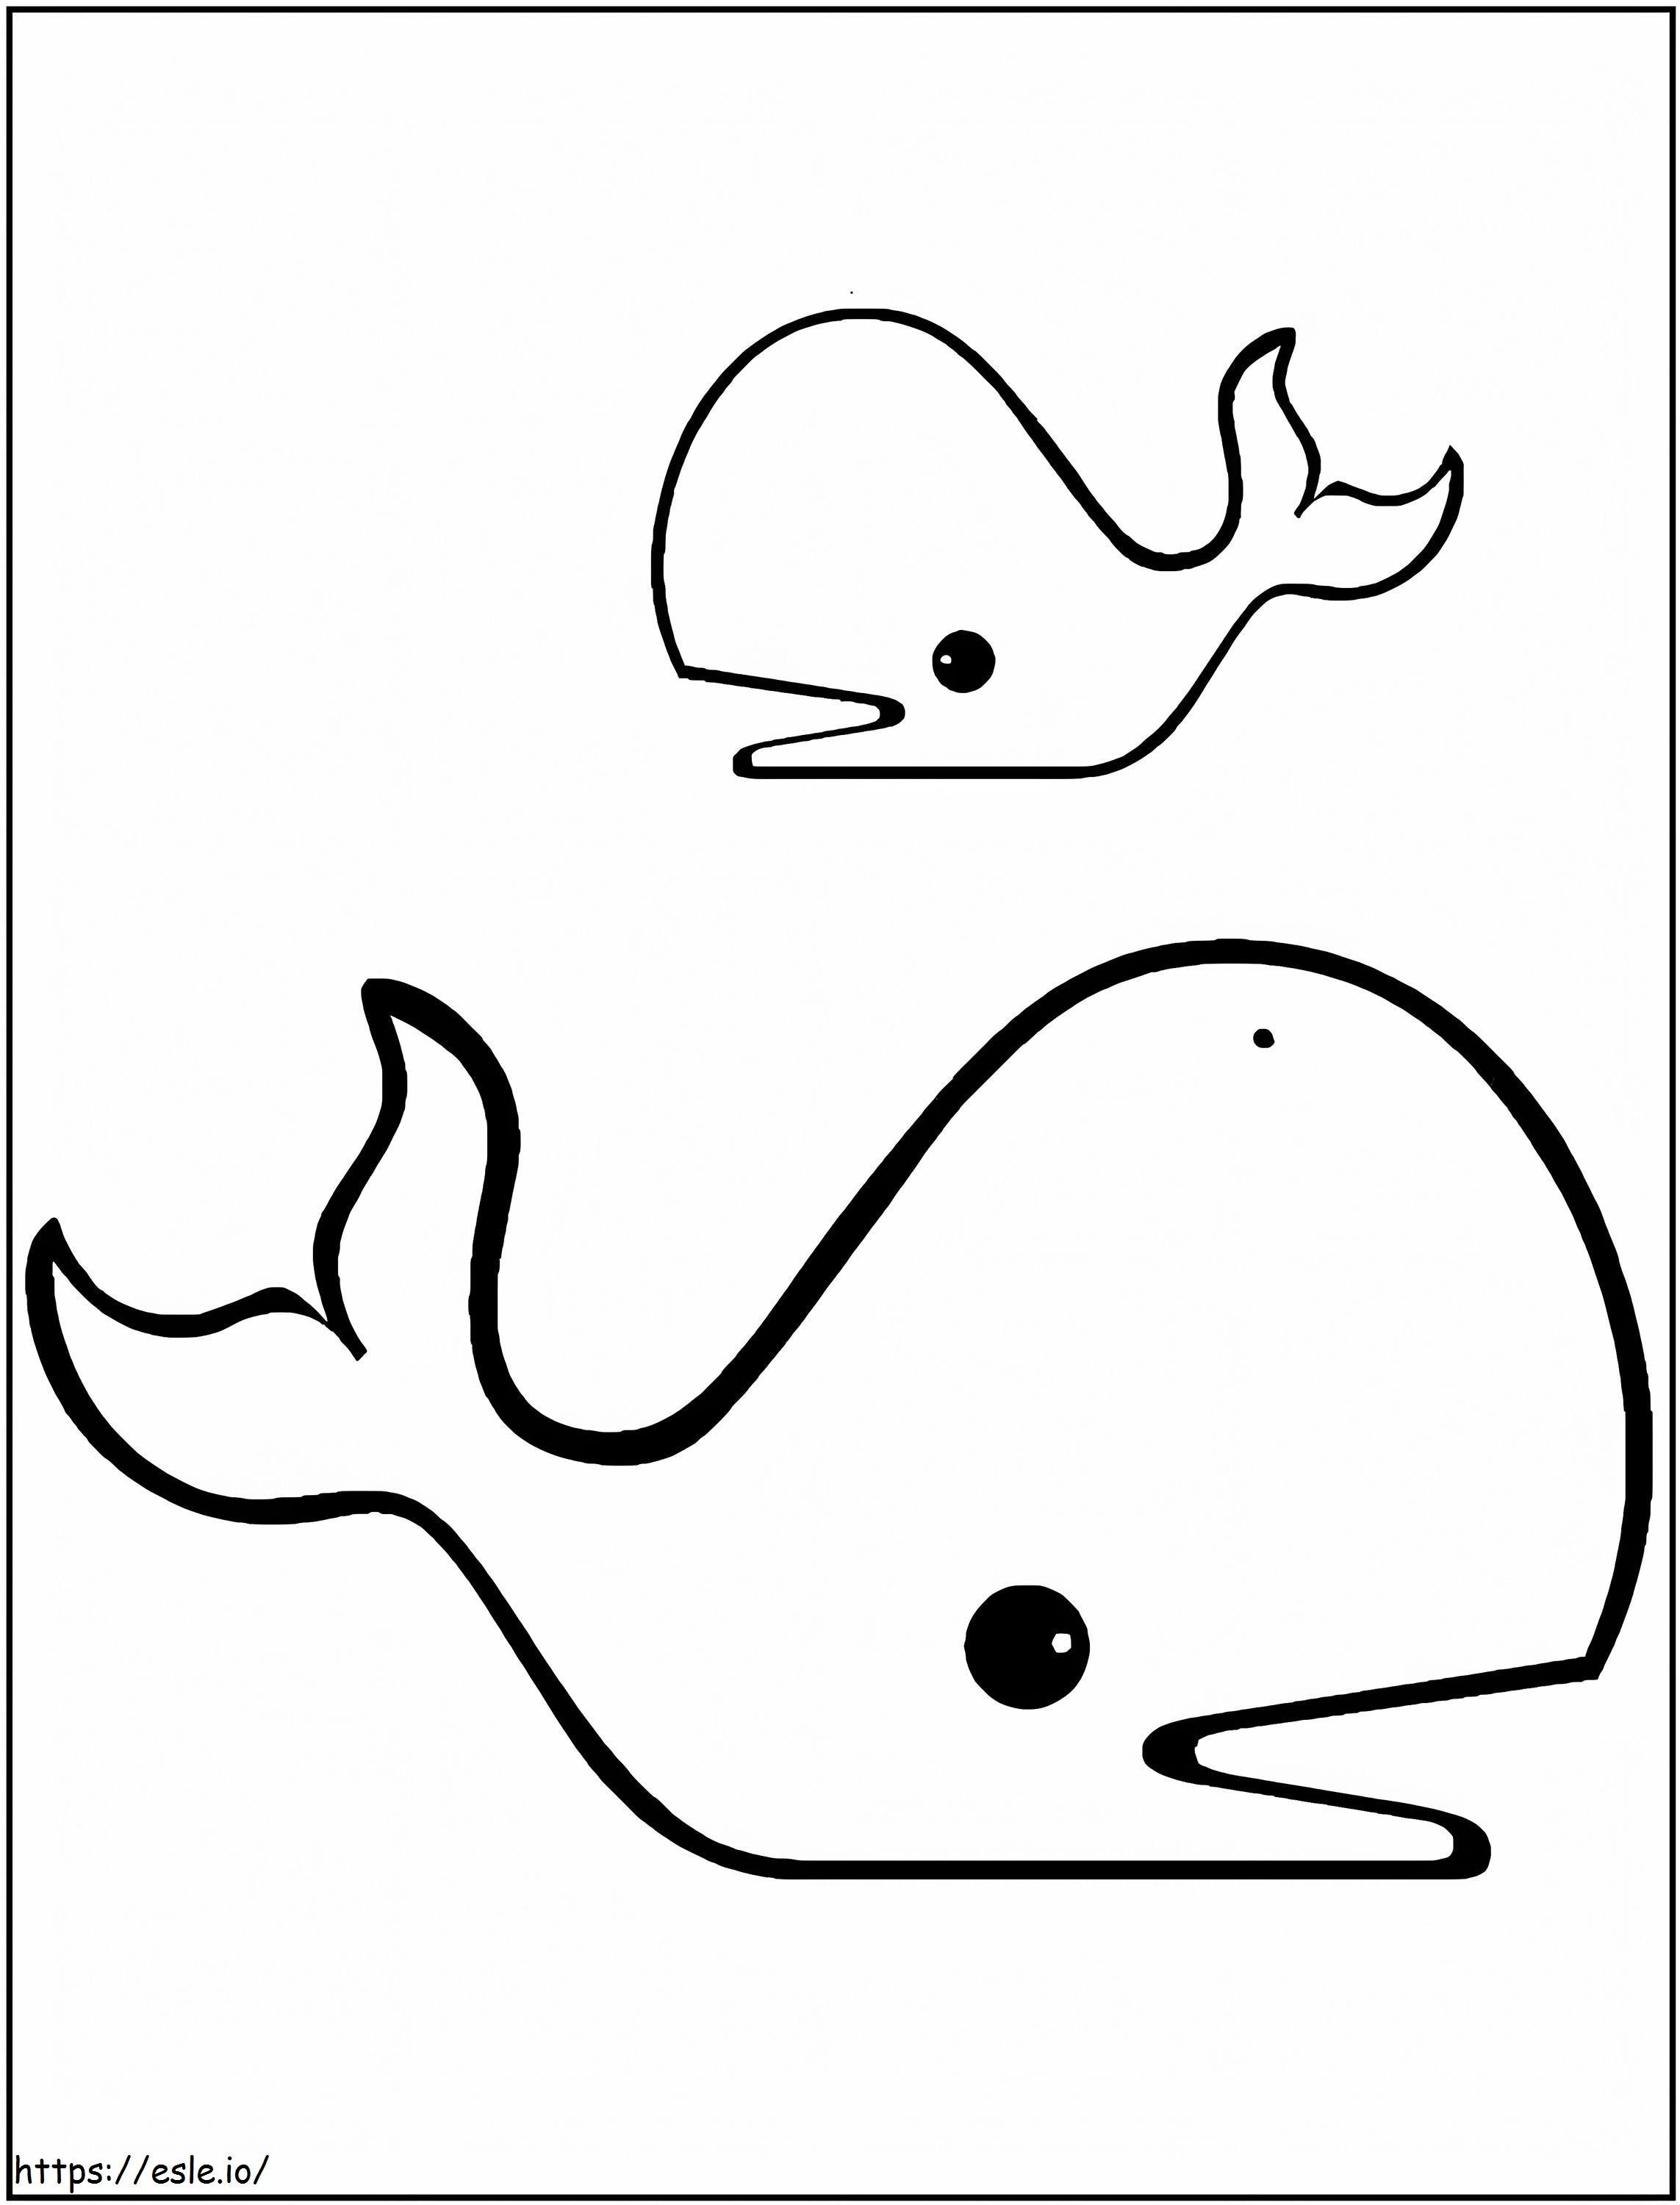 Draw Two Whales coloring page